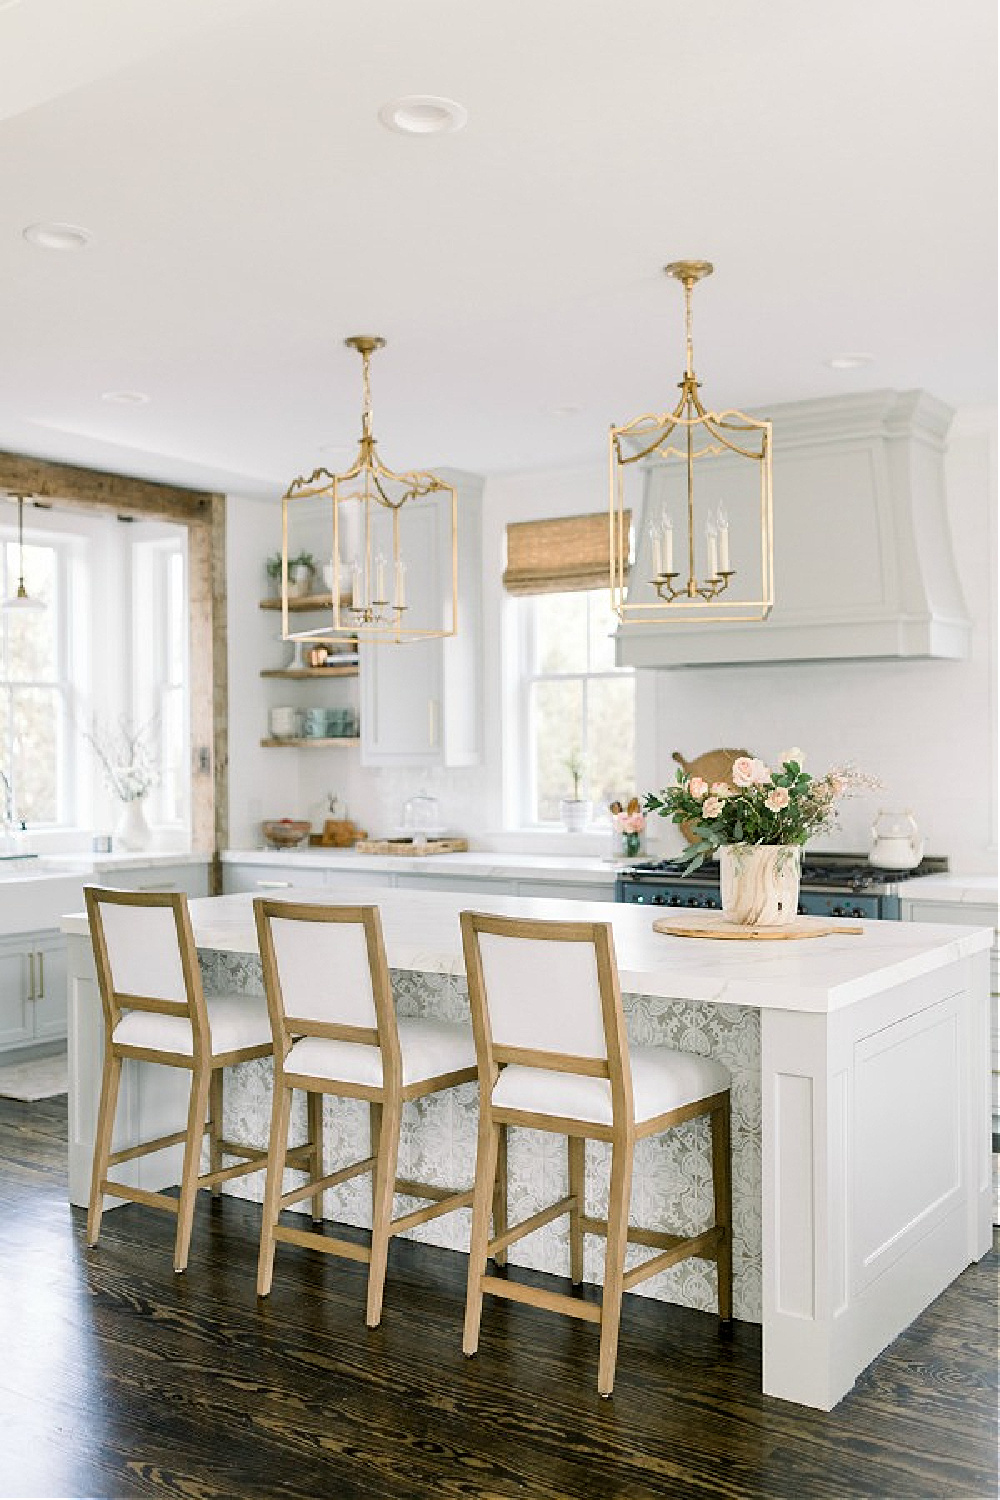 Elegant white farmhouse kitchen with Benjamin Moore Repose Grey cabinets, subway tile, gold accents, and reclaimed barn wood. Design: Finding Lovely. Come see Timeless Tranquil White & Grey Kitchen Tour. Wall color: Benjamin Moore Chantilly Lace.